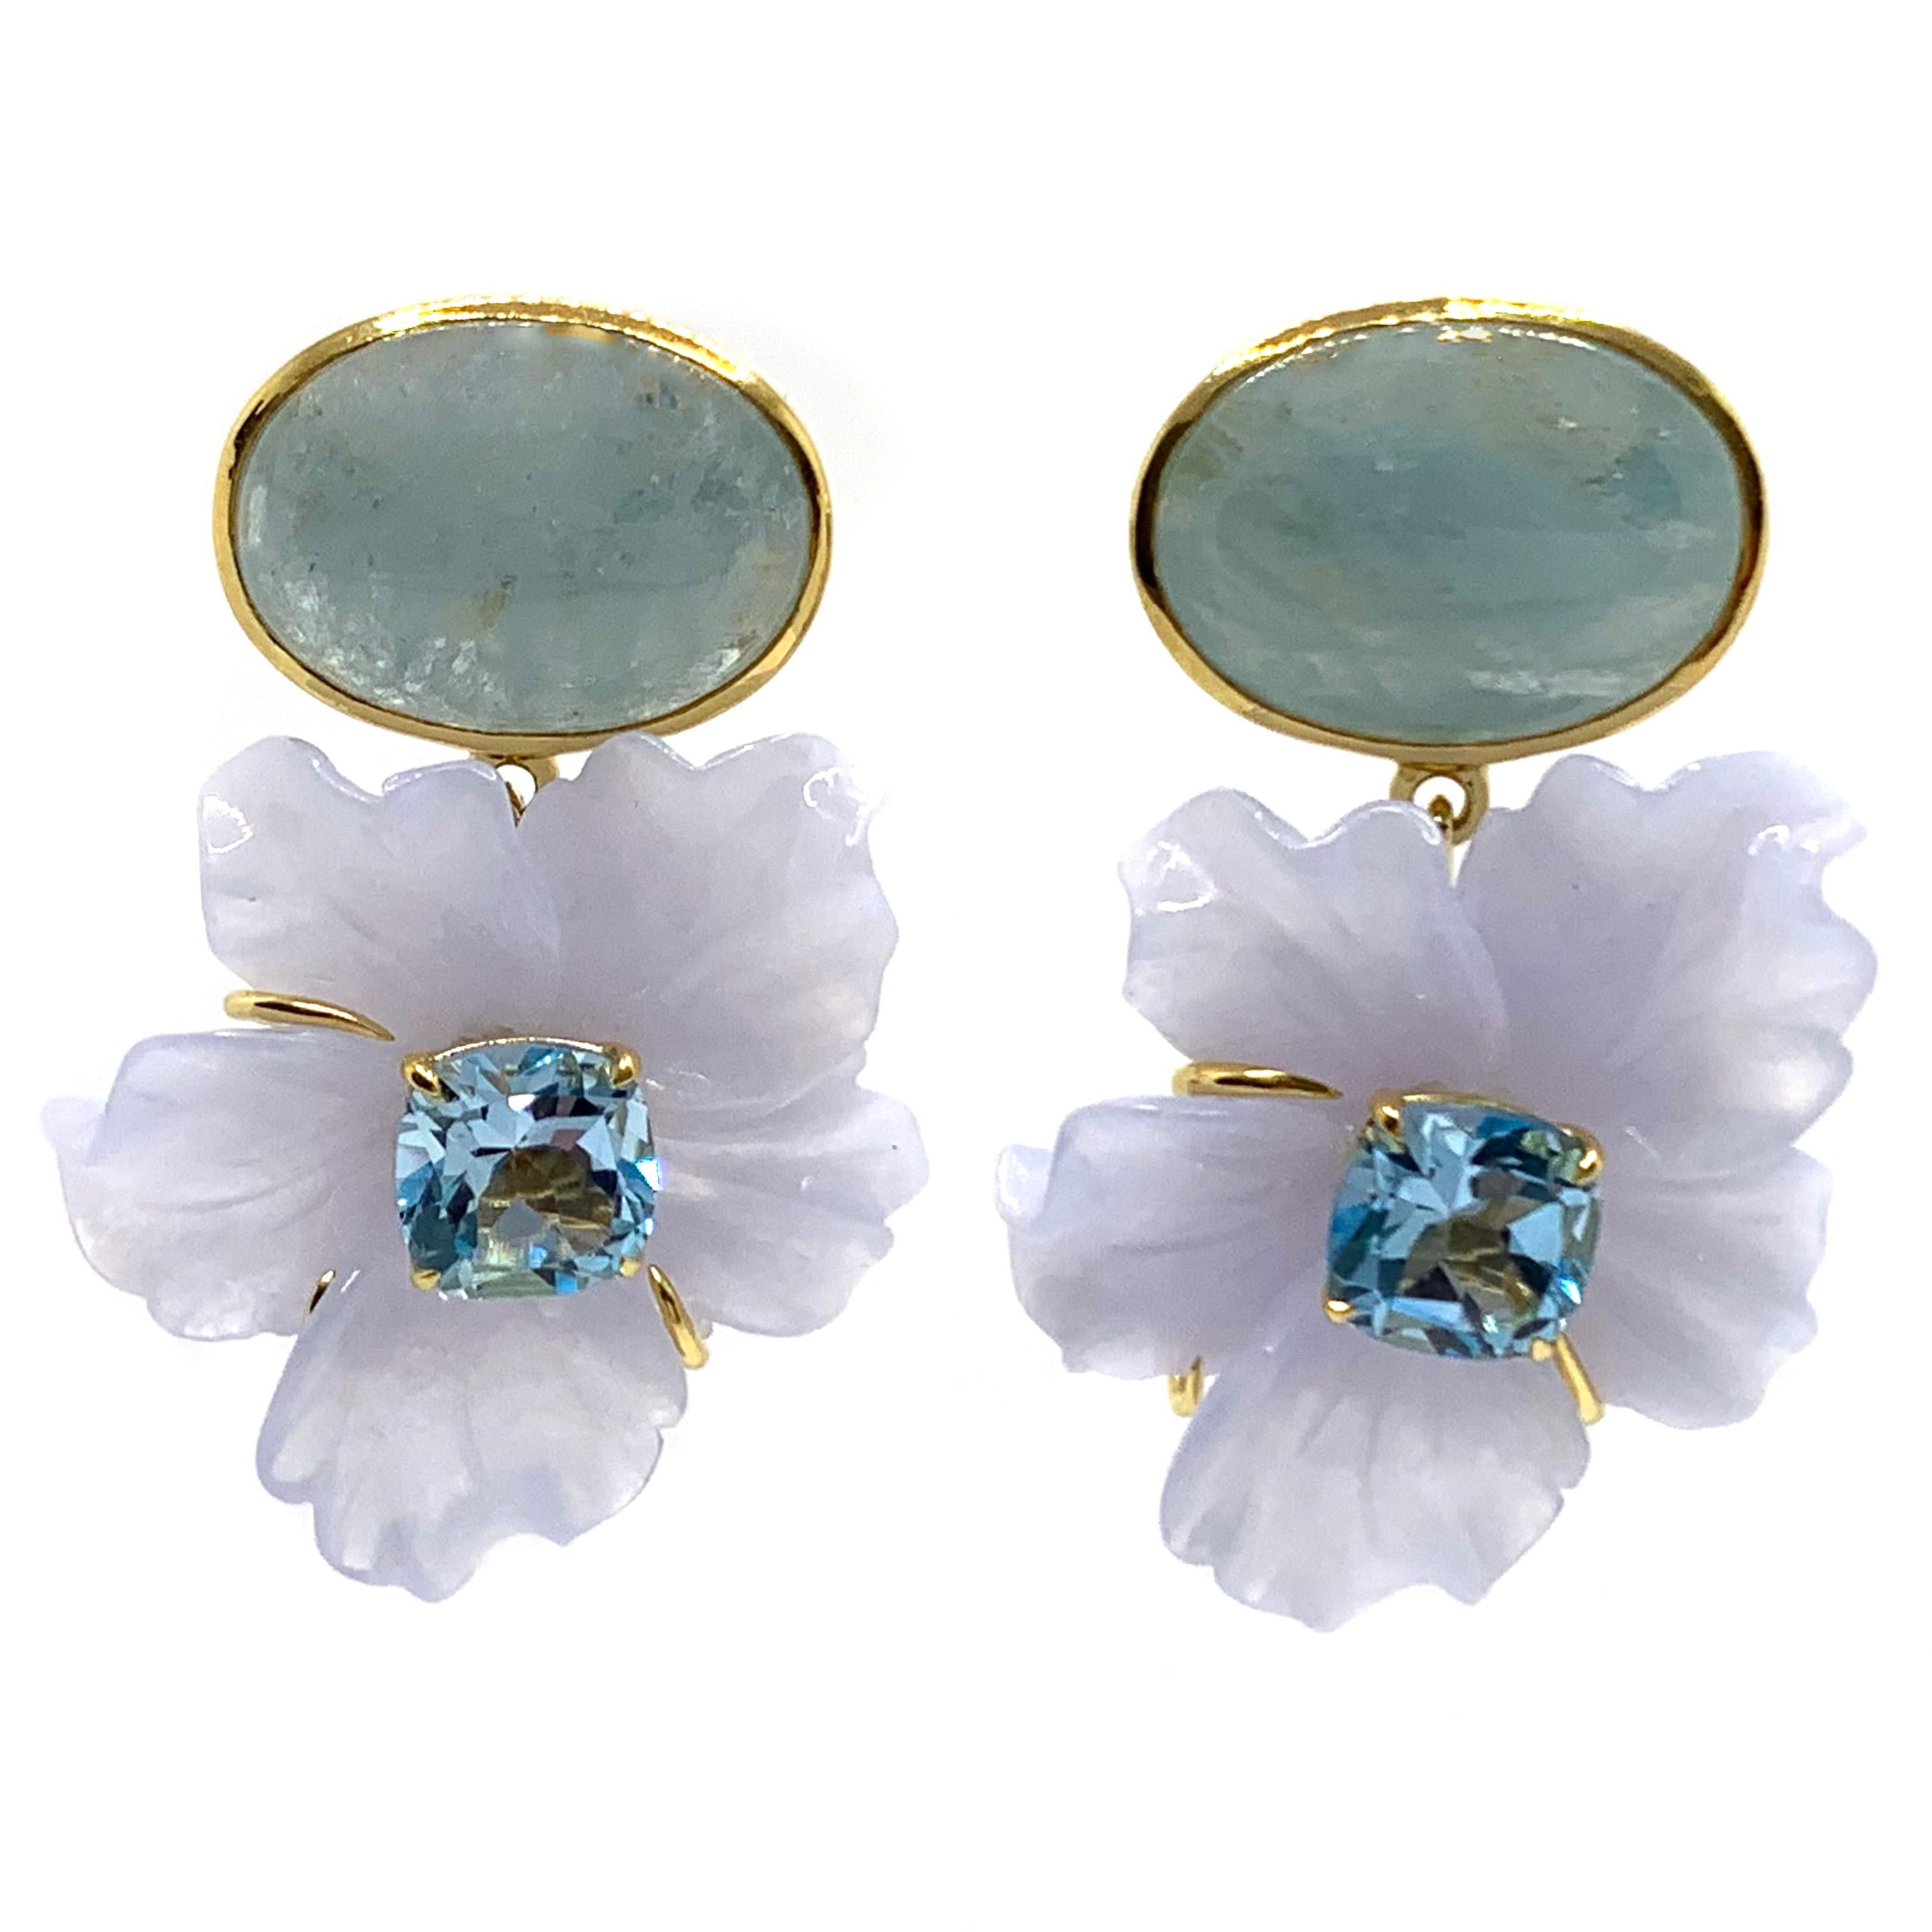 Stunning Cabochon Aquamarine and Carved Chalcedony Flower Drop Earrings

This gorgeous pair of earrings features oval cabochon-cut aquamarine and beautifully 3D carved Chalcedony flower with cushion-cut sky blue topaz in center, handset in 18k